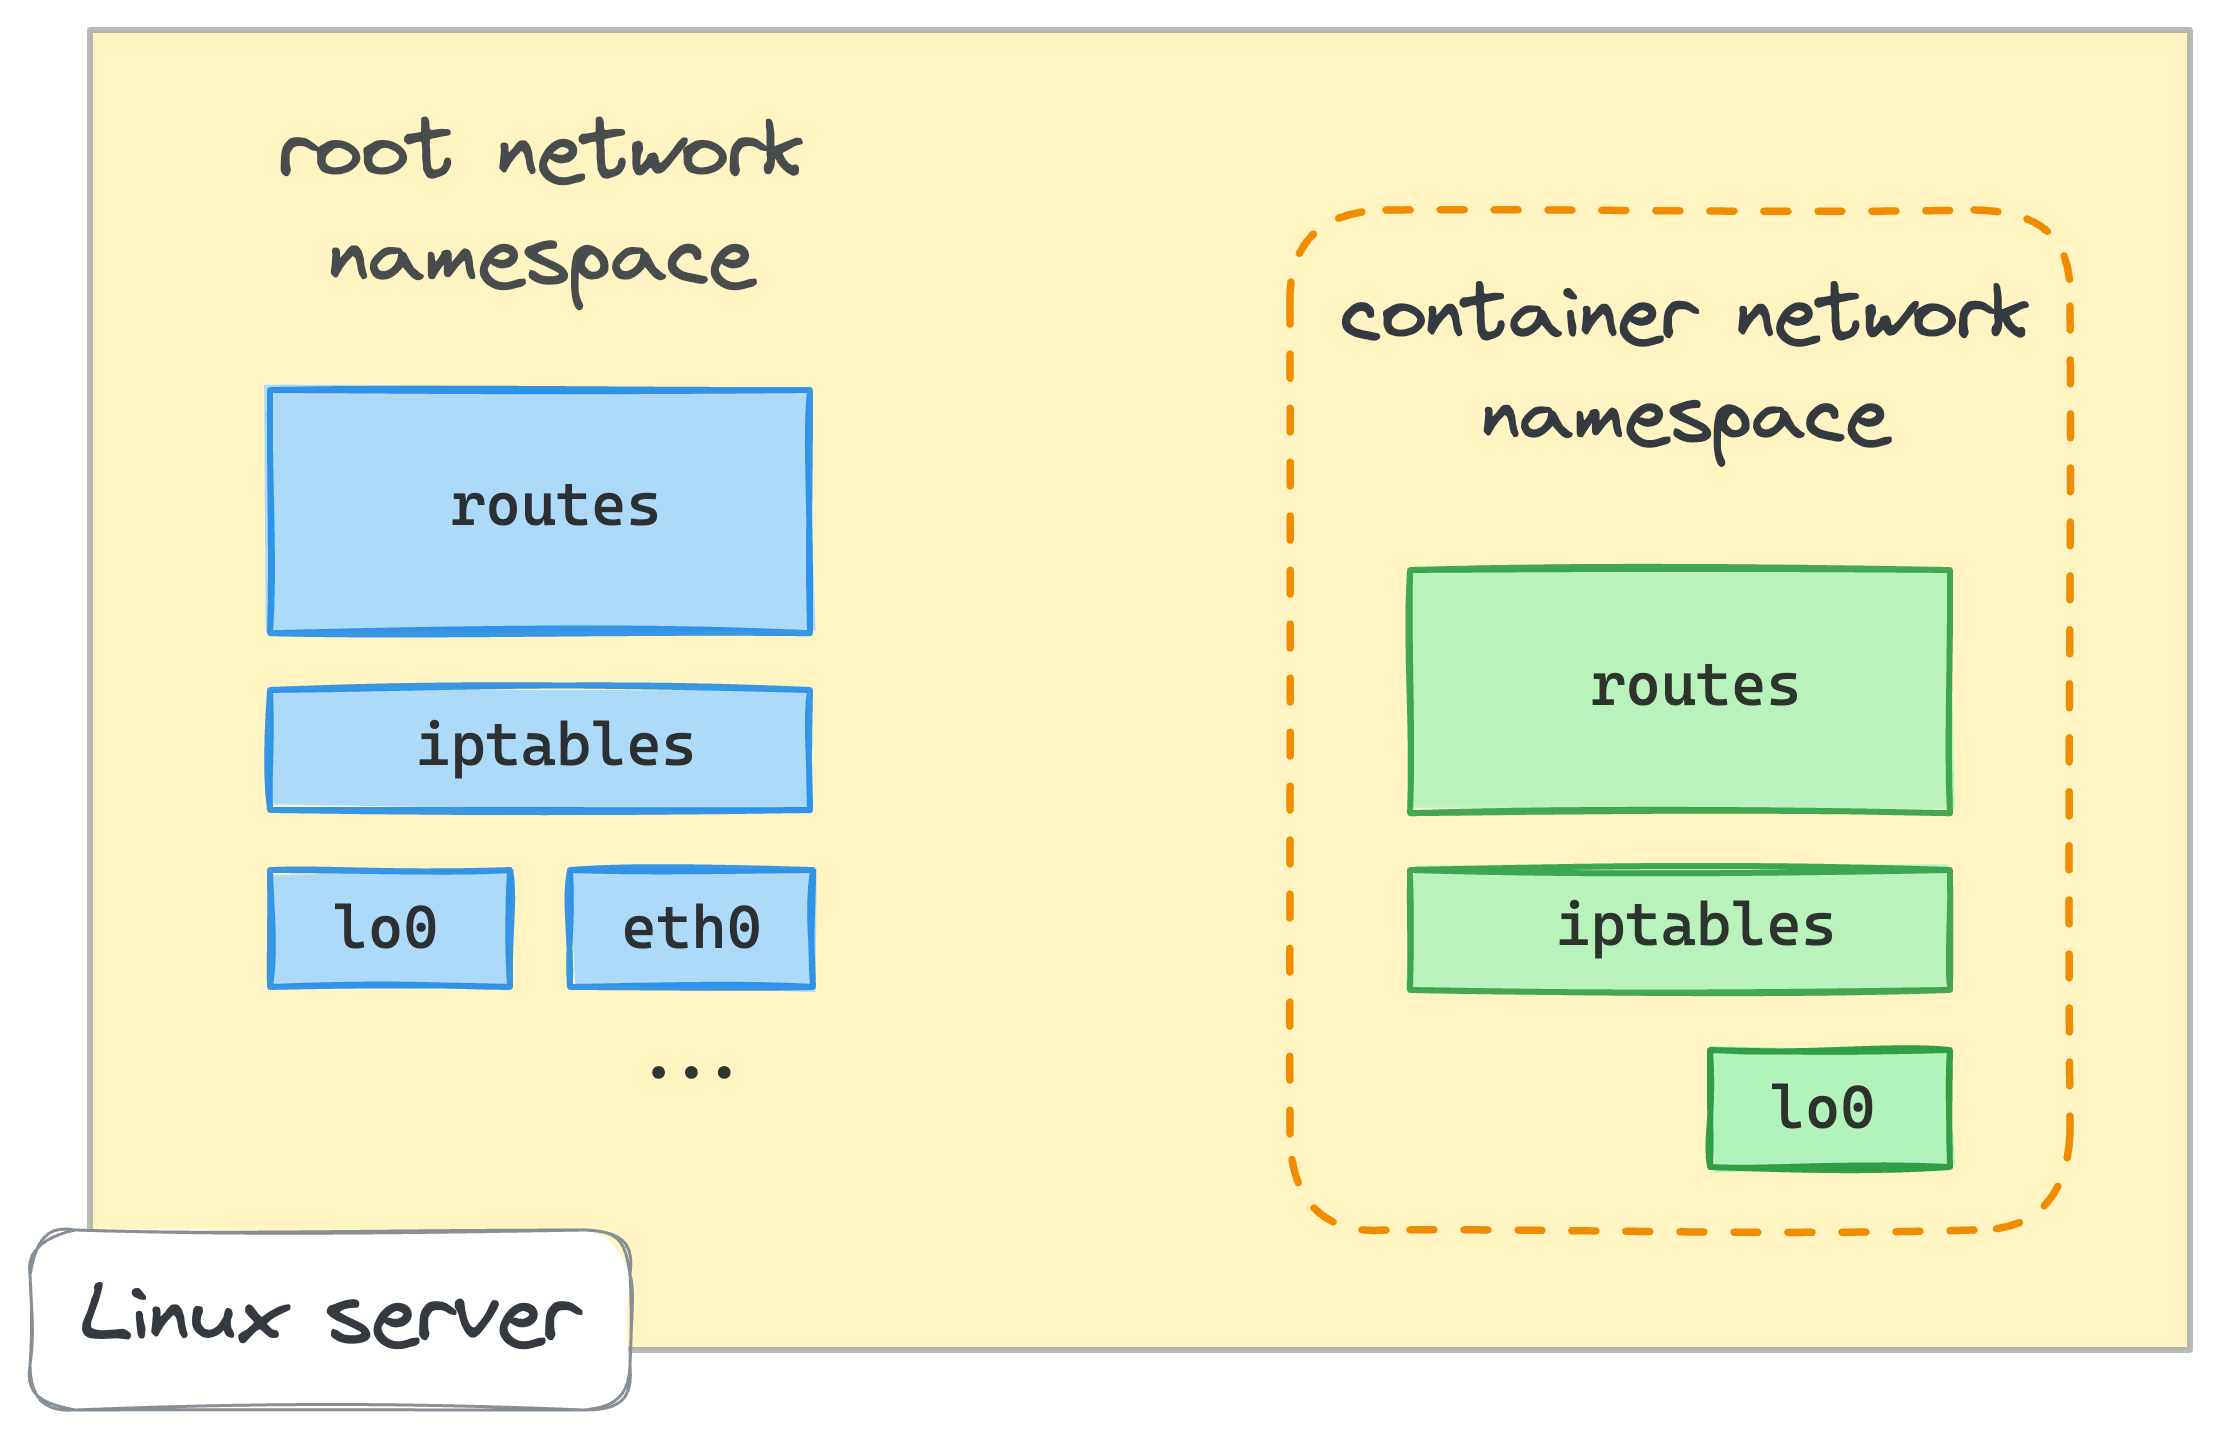 Linux network namespace visualized